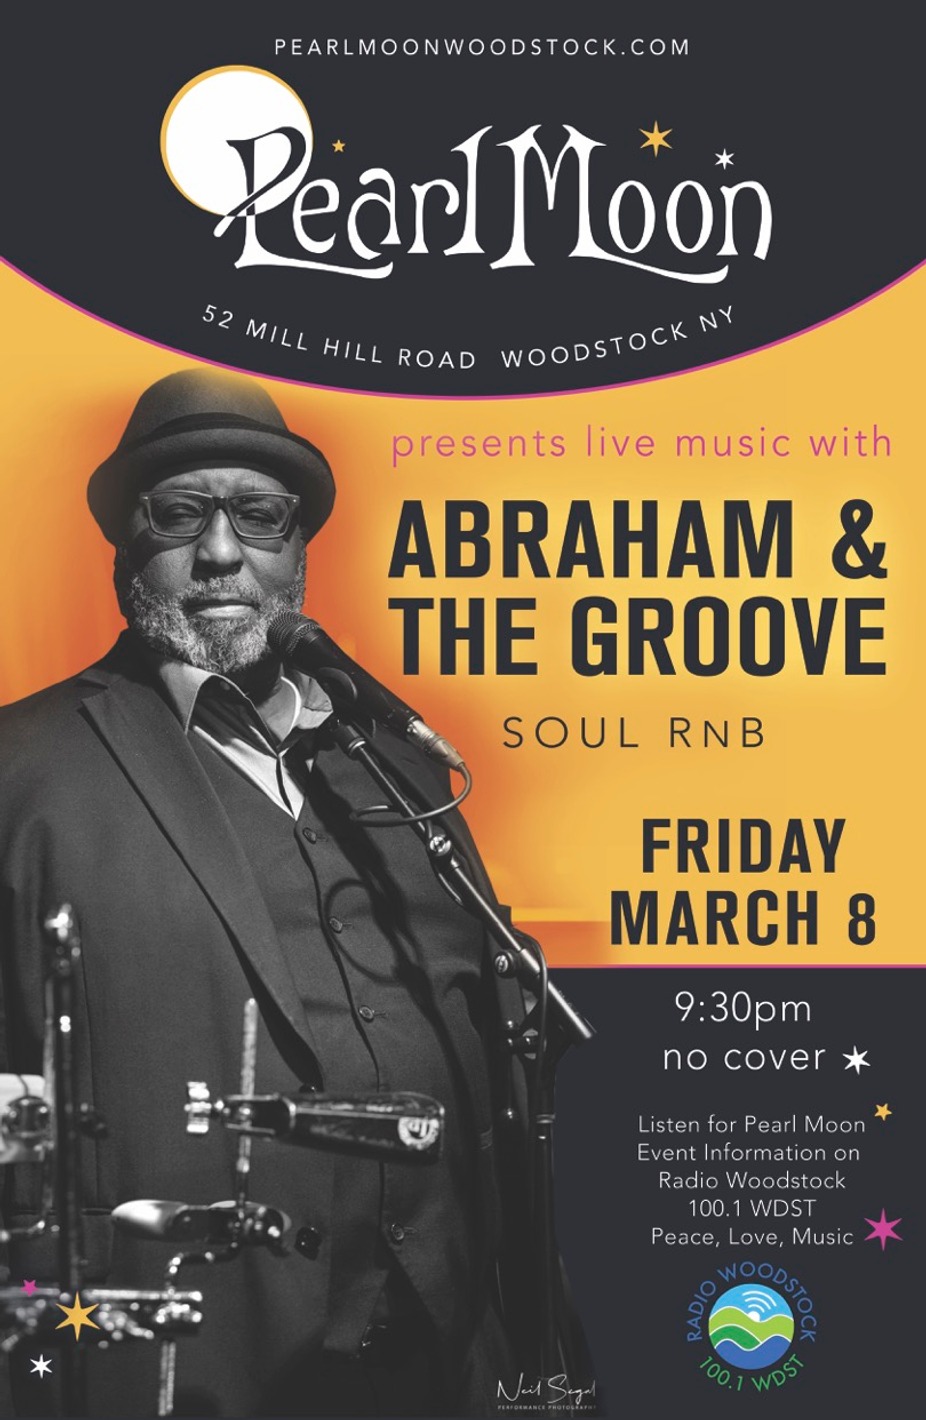 ABRAHAM & THE GROOVE event photo